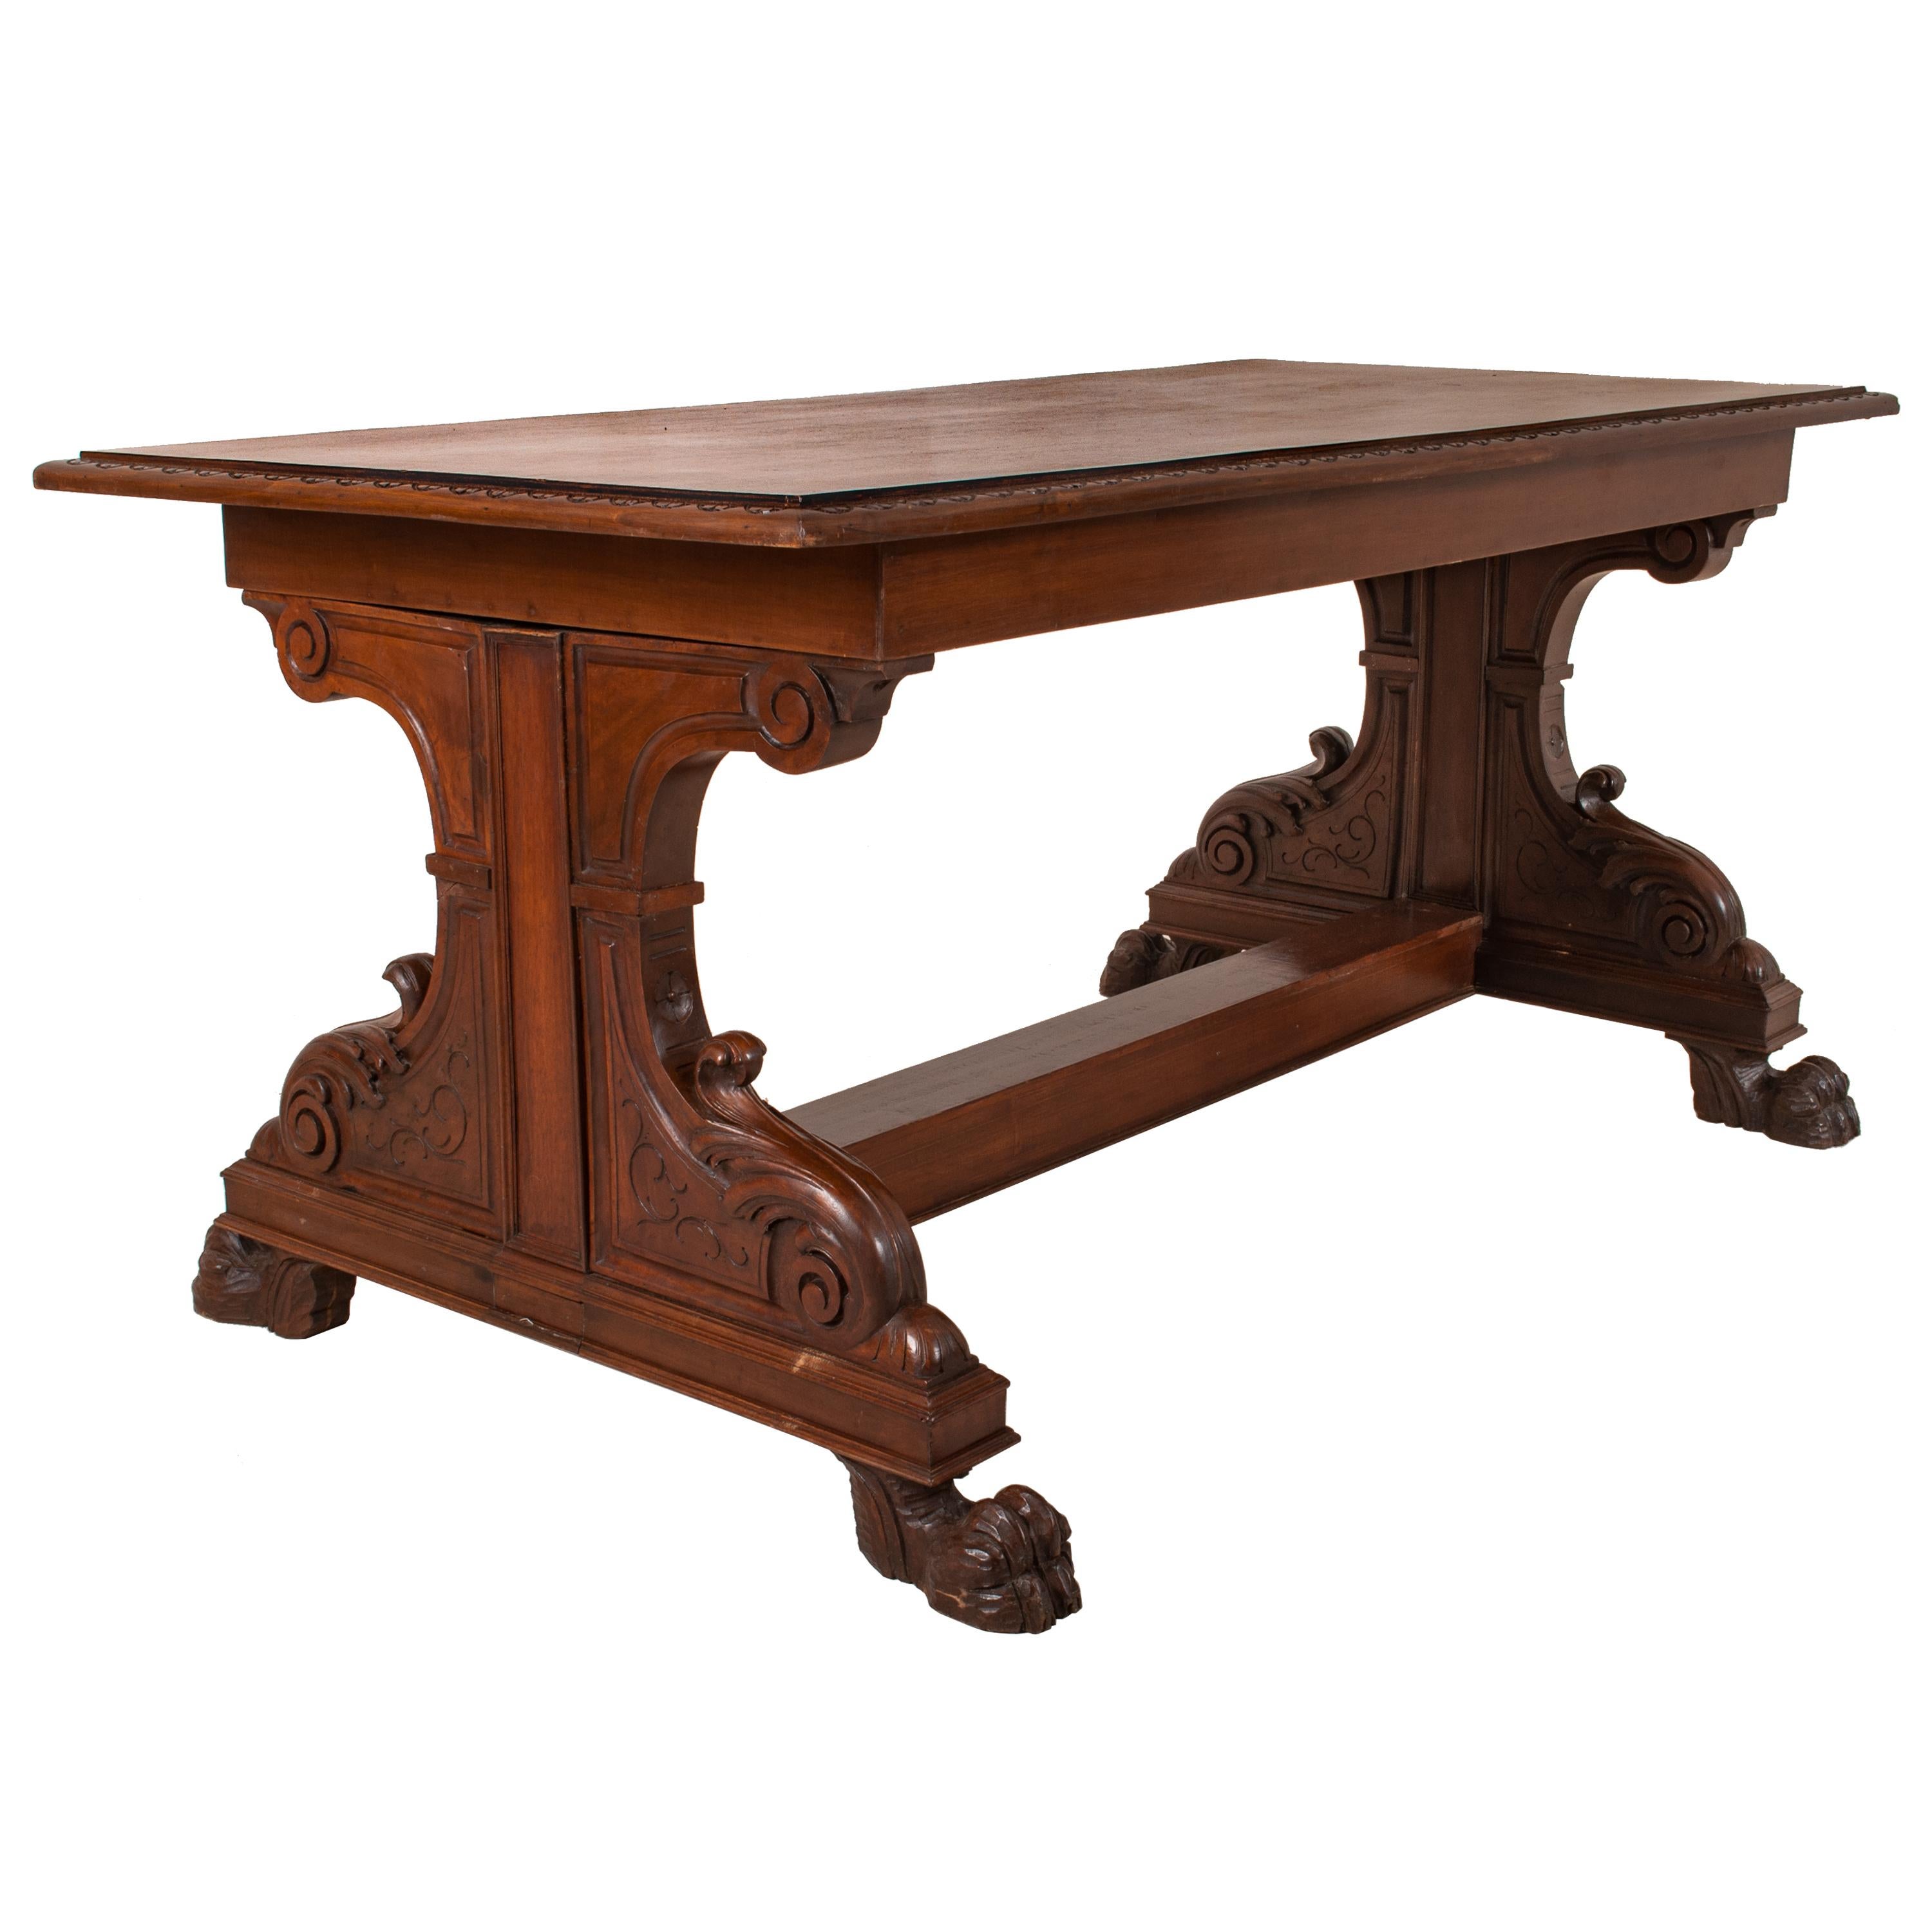 Antique Italian Carved Walnut Renaissance Revival Library Serving Table, 1870 In Good Condition For Sale In Portland, OR